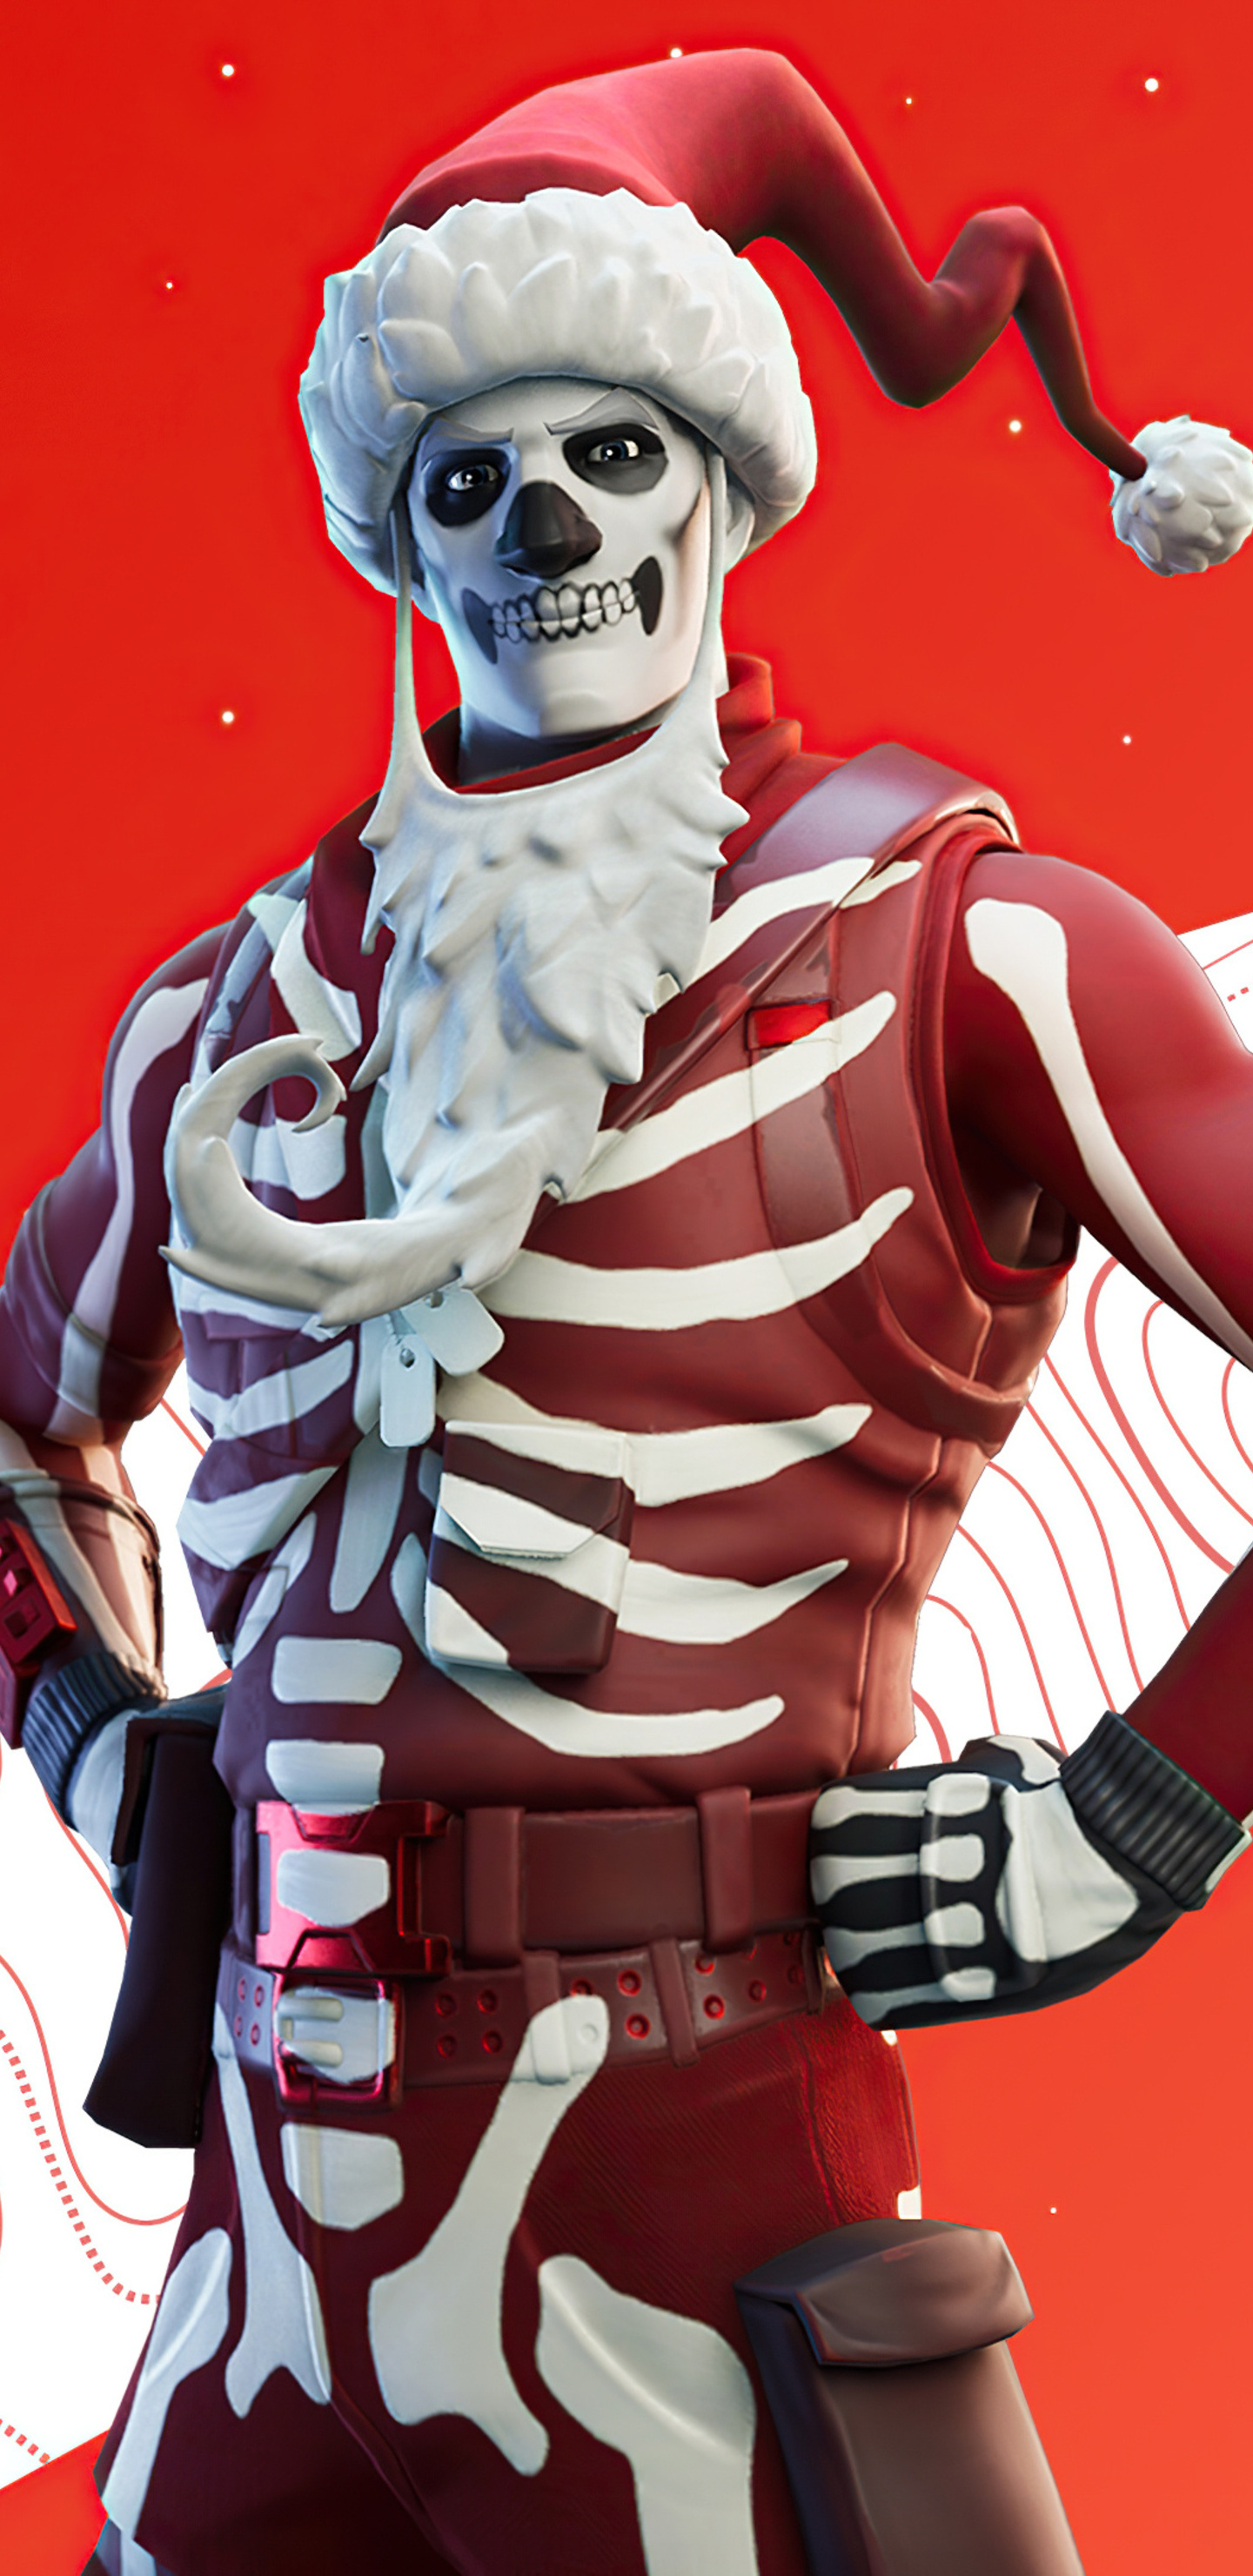 1440x2960 Good Doggo Yule Trooper Fortnite Samsung Galaxy Note 9,8, S9,S8,S8+ QHD HD 4k Wallpapers, Images, Backgrounds, Photos and Pictures